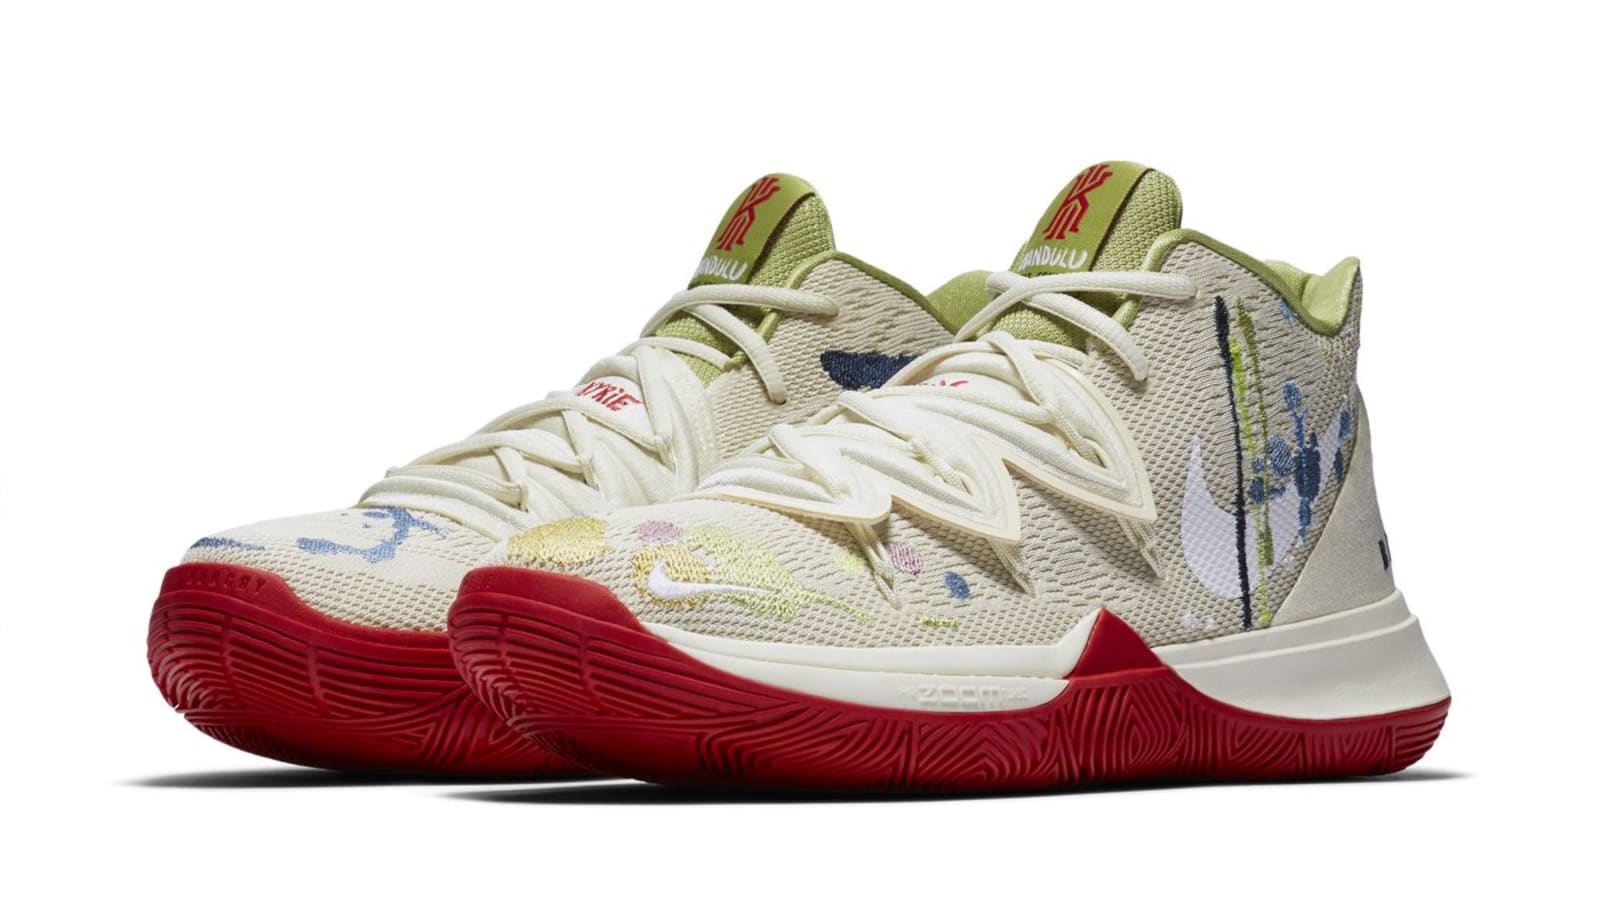 Kyrie Irving Links Up With Boston-Based Bandulu For Nike Kyrie 5